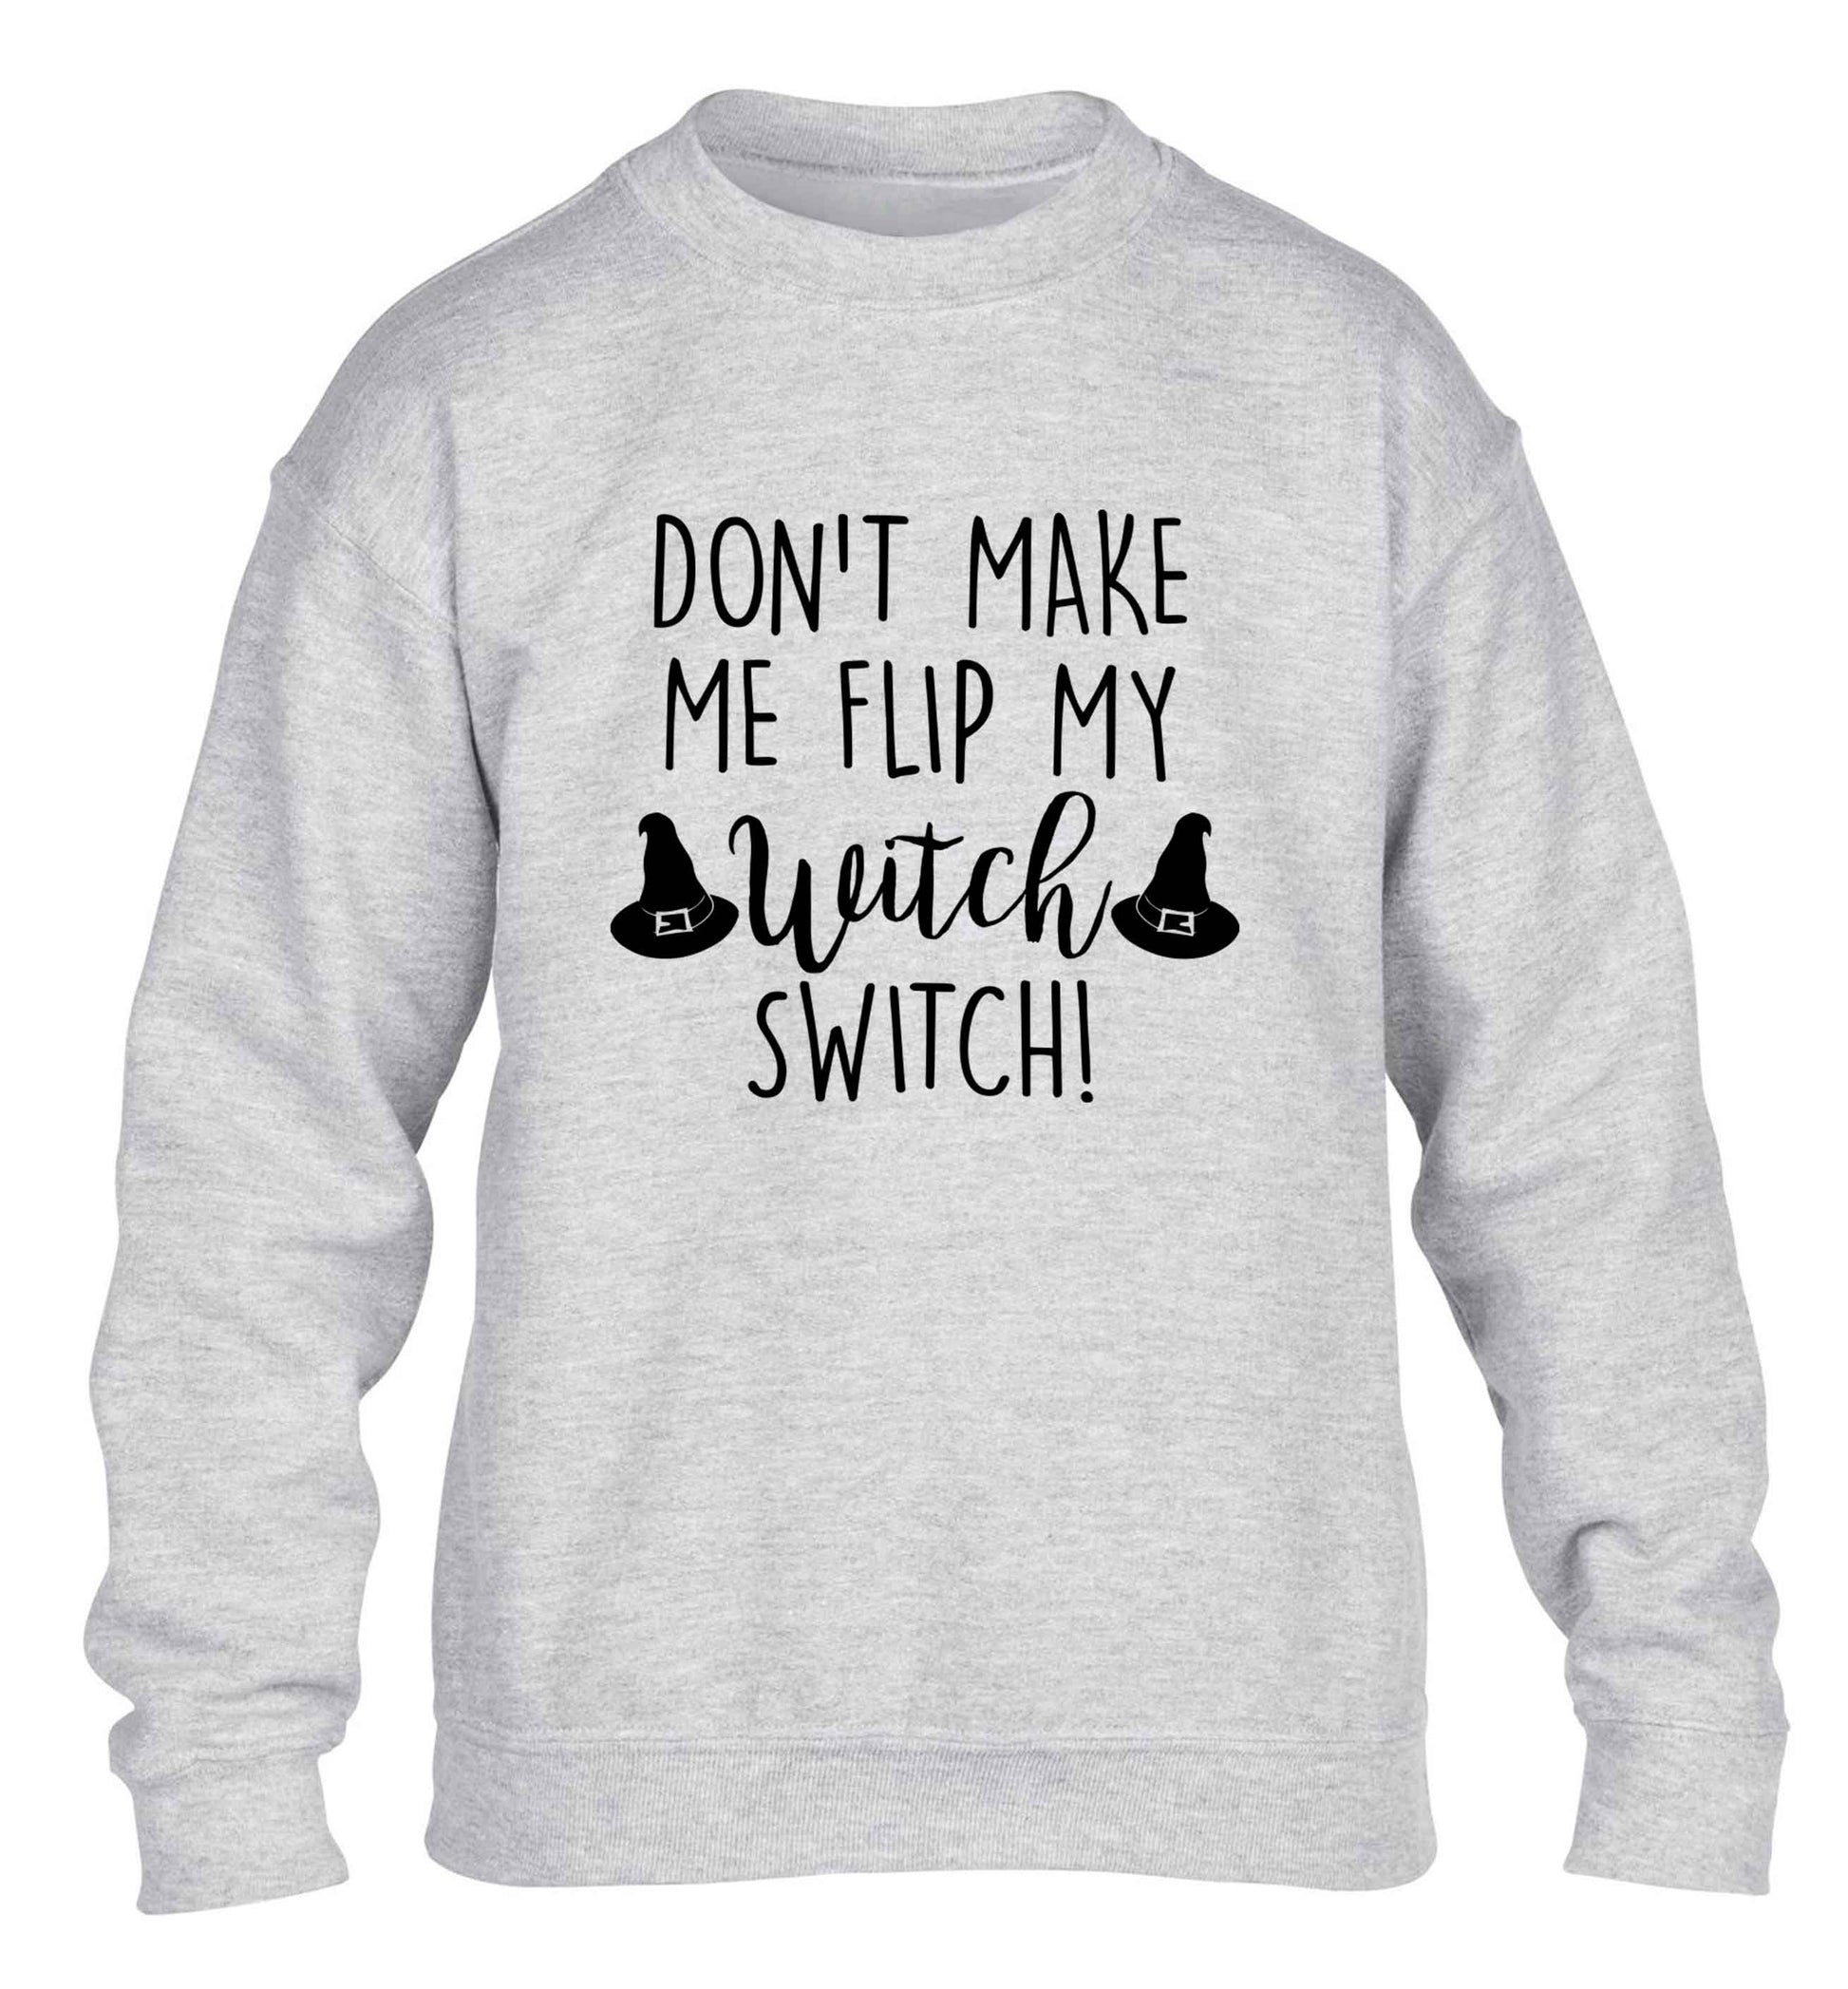 Don't make me flip my witch switch children's grey sweater 12-13 Years